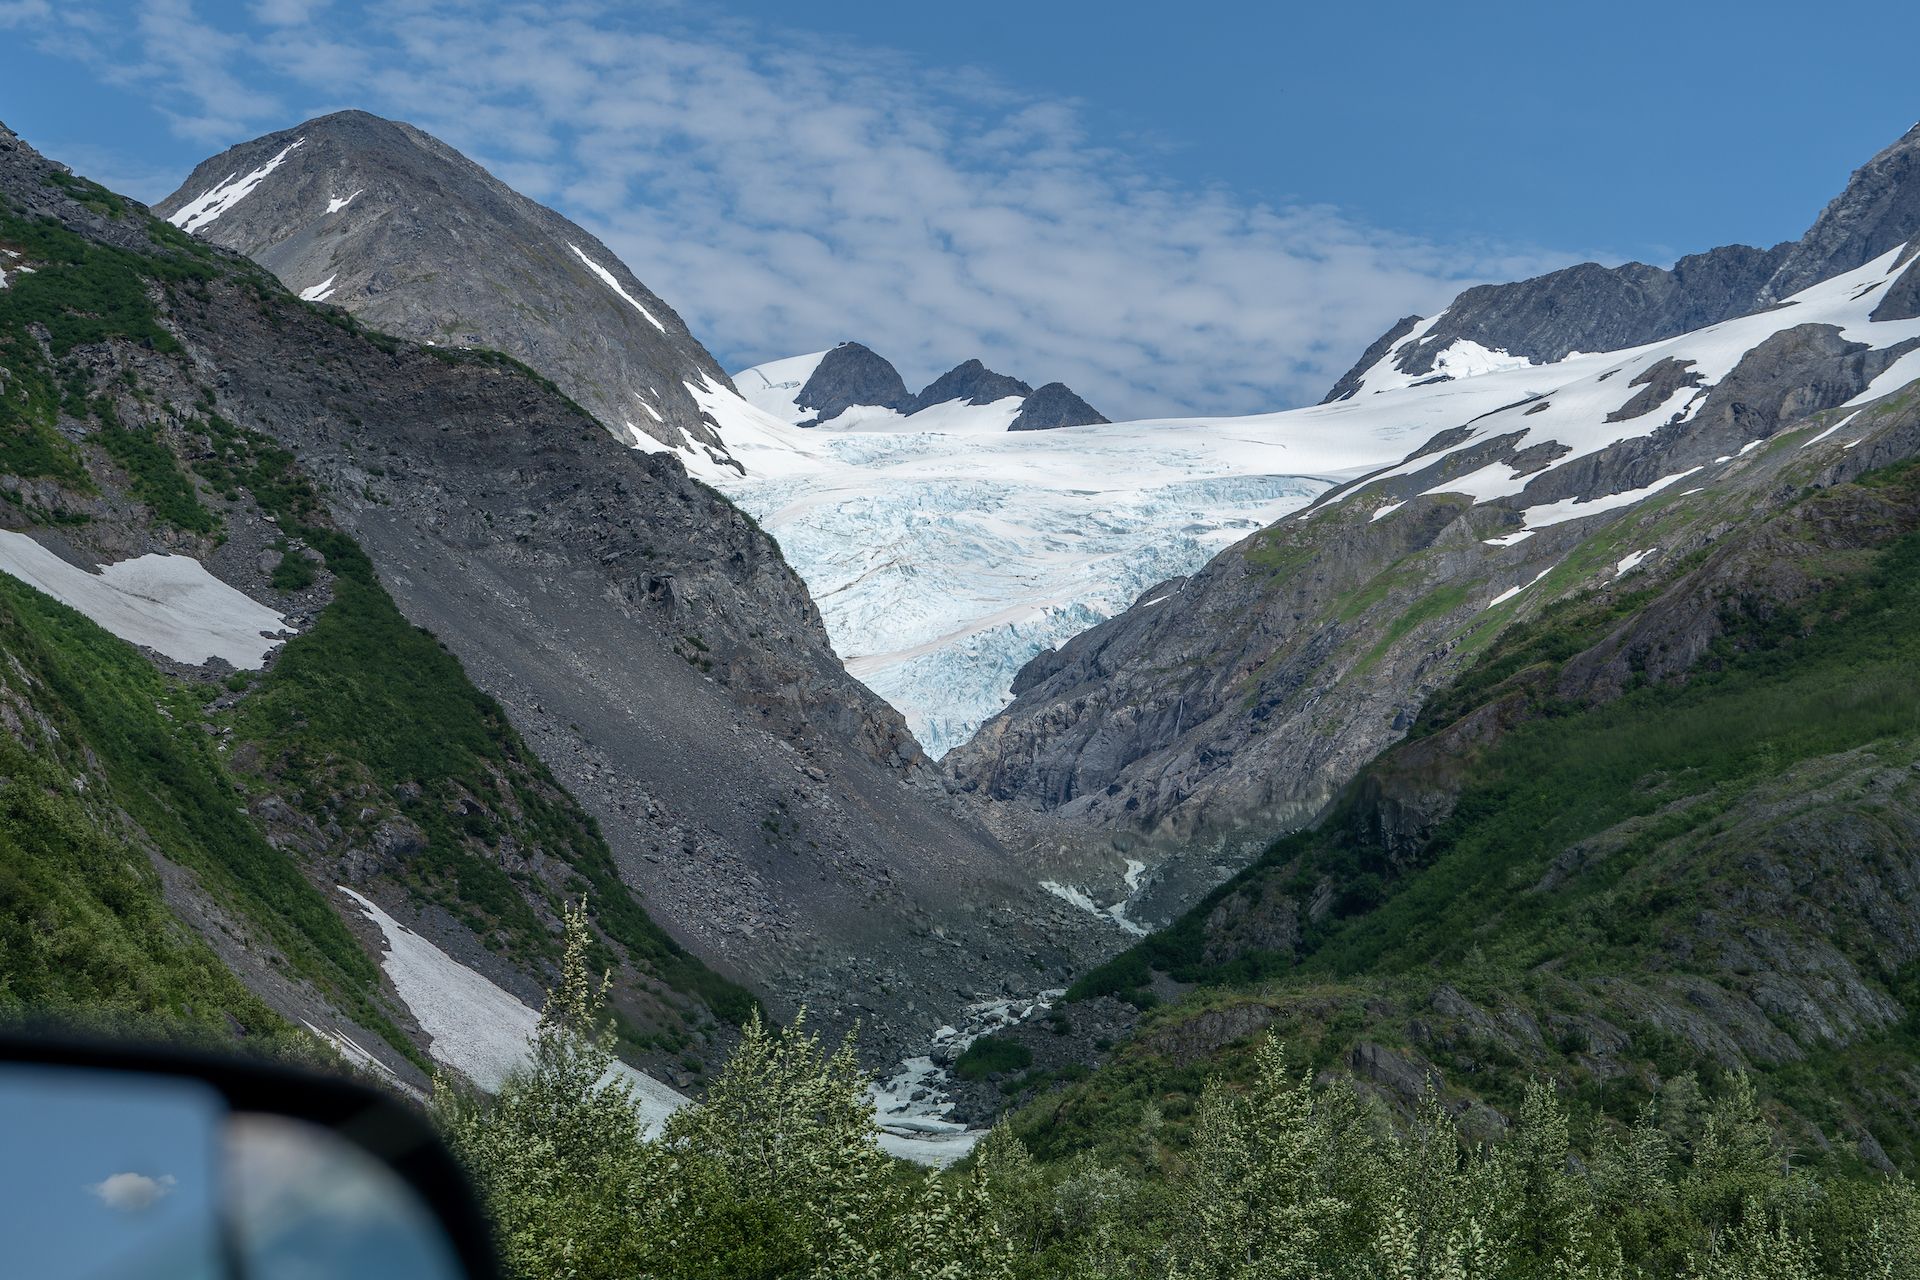 Whittier is surrounded by a dozen of glaciers.